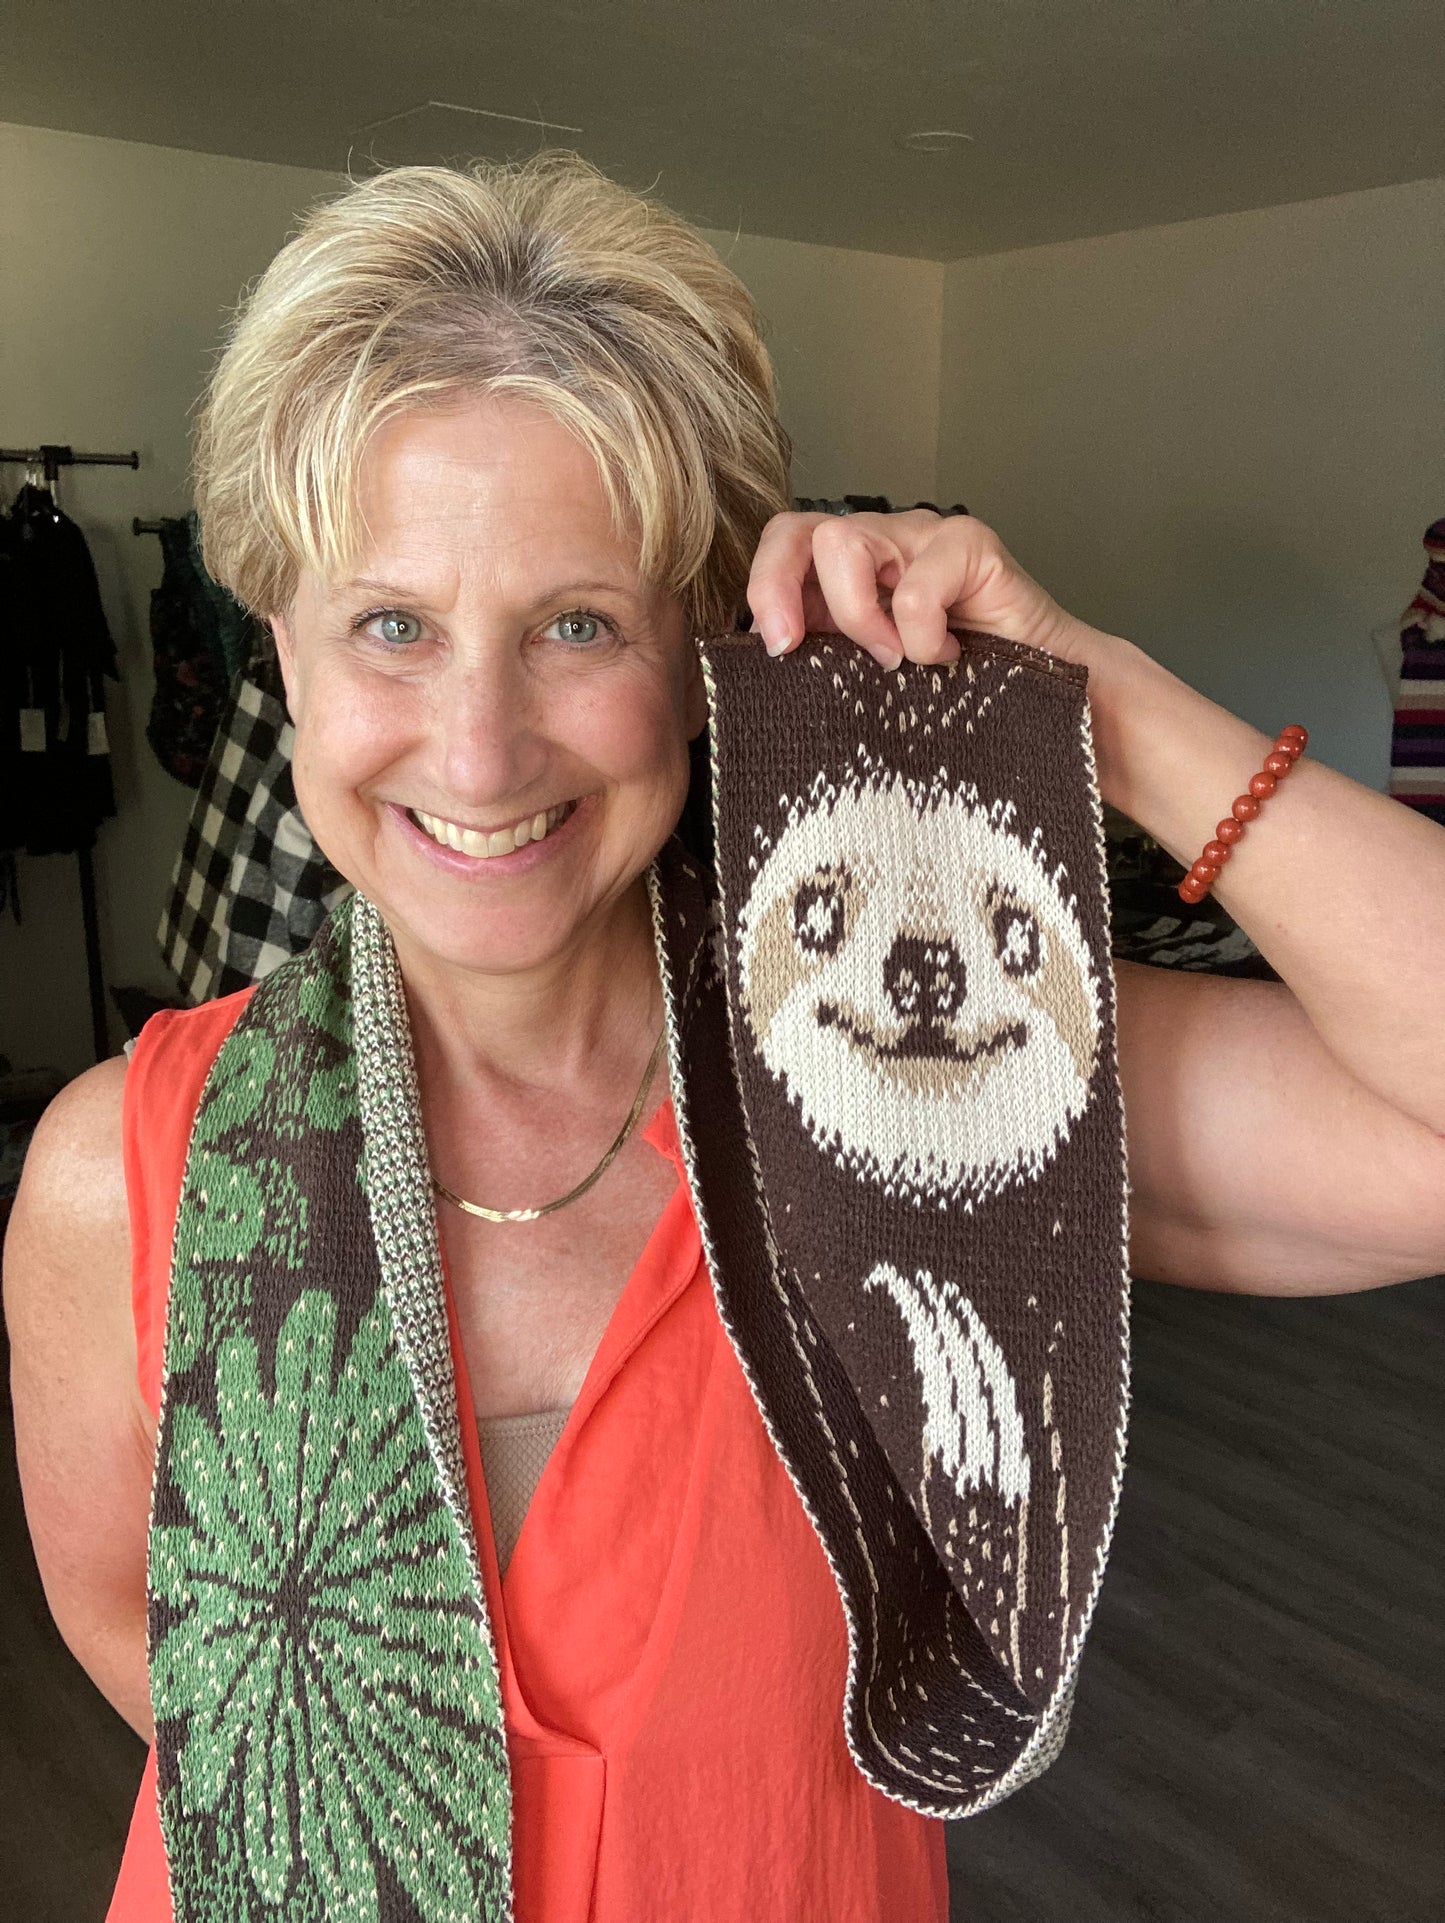 Women's Recycled Cotton Sweater - Knit Fashion Scarf - Sloth (only one available)